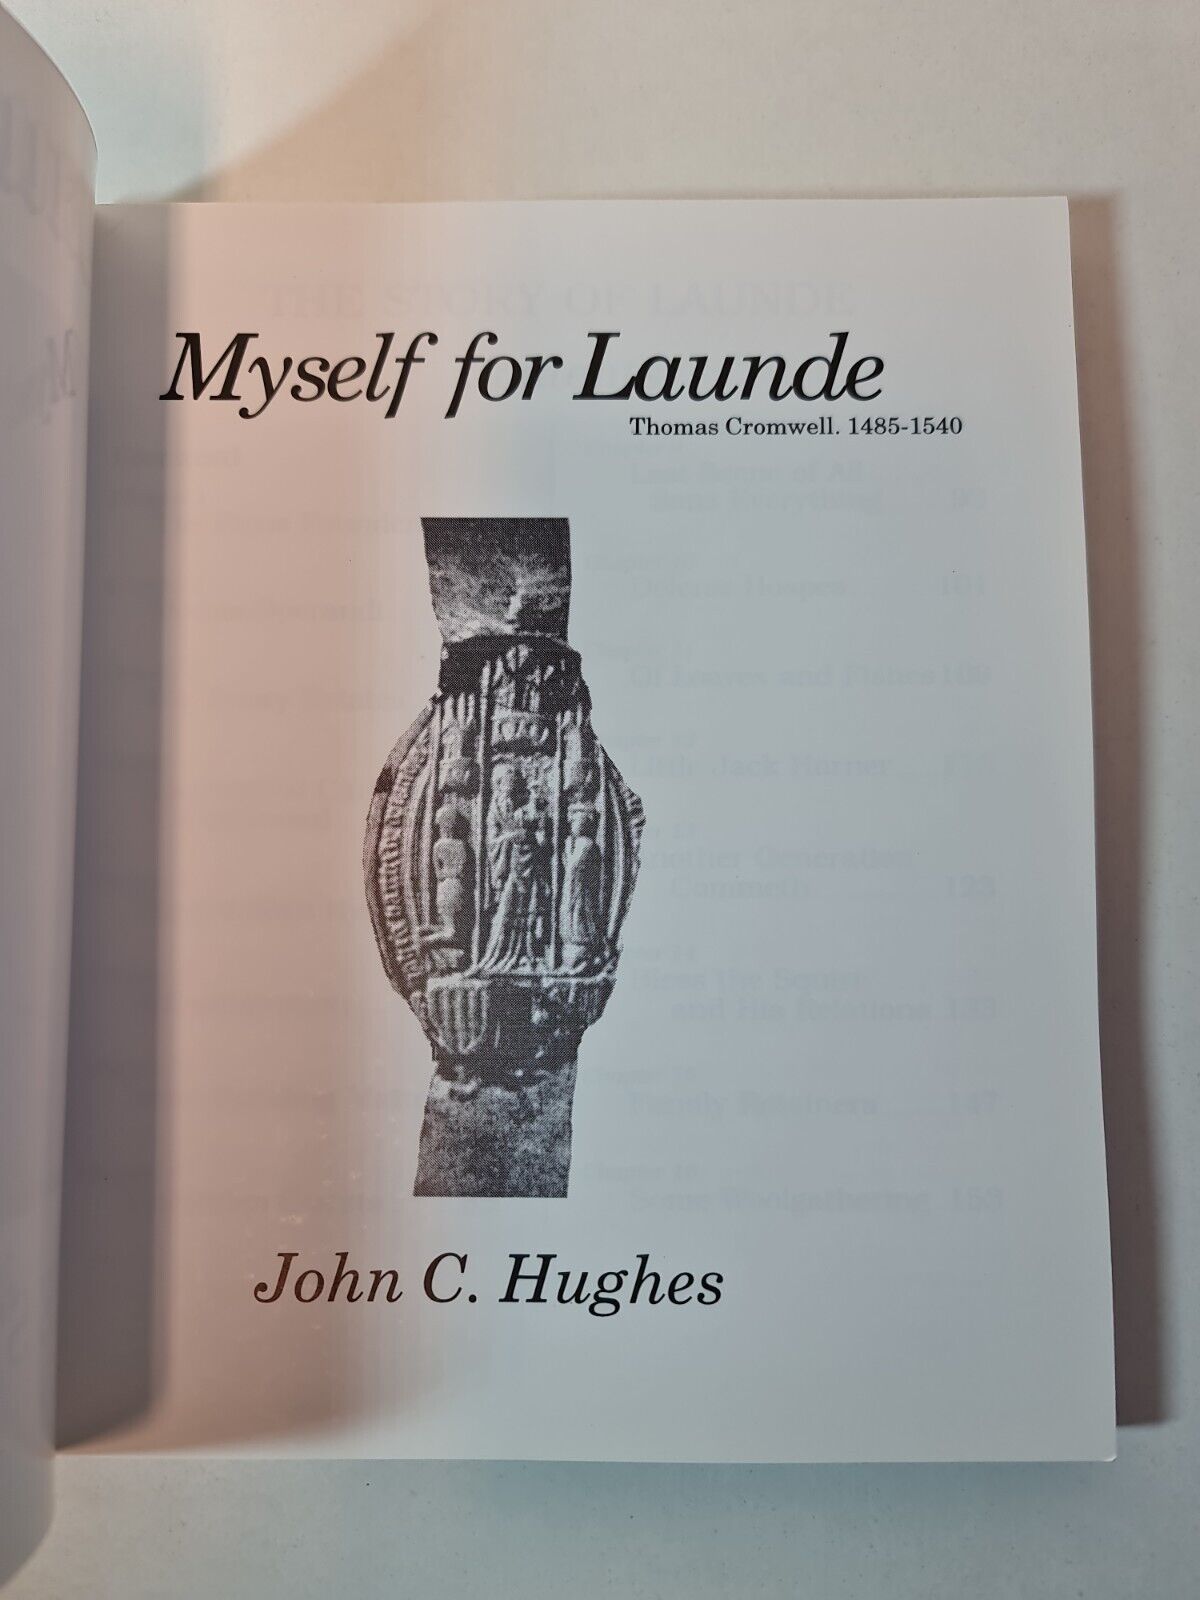 Launde Abbey: The Story of the Abbey by John C Hughes (1998)